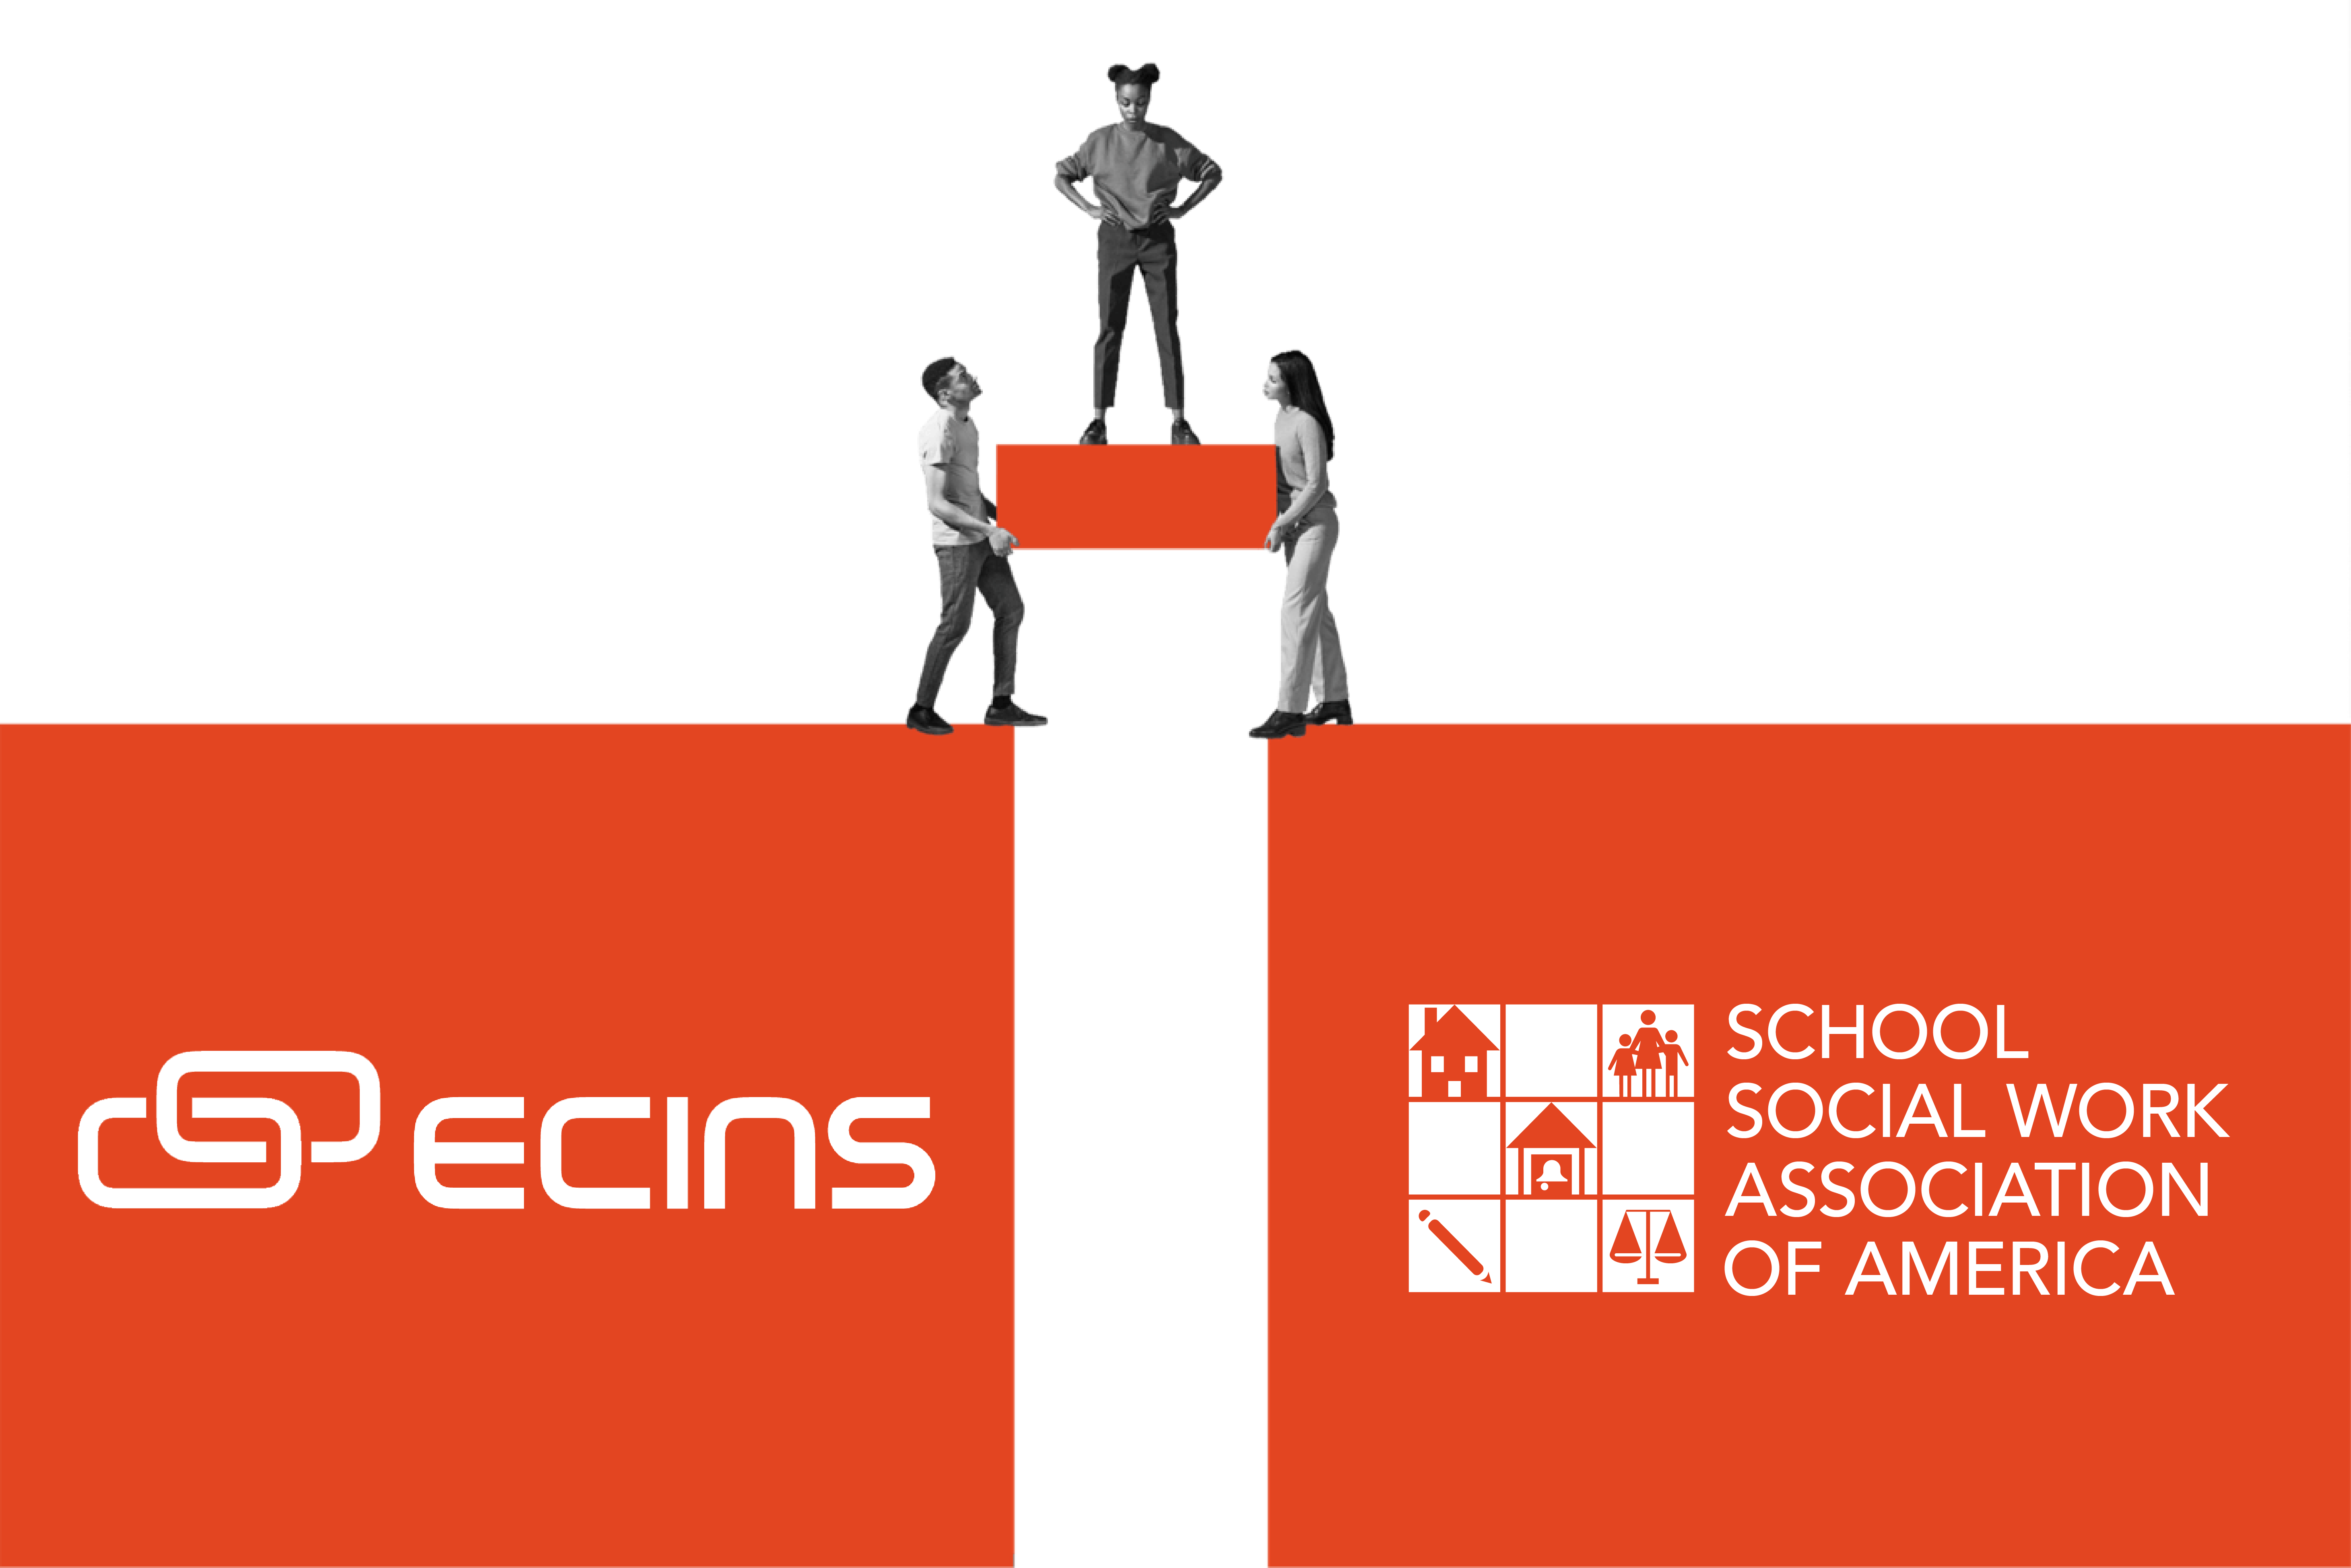 >>ECINS and SSWAA Join Forces to Provide School Social Workers with Collaborative Case Management System that Allows Better Communication and Engagement Between Students, Families and Other Key Person